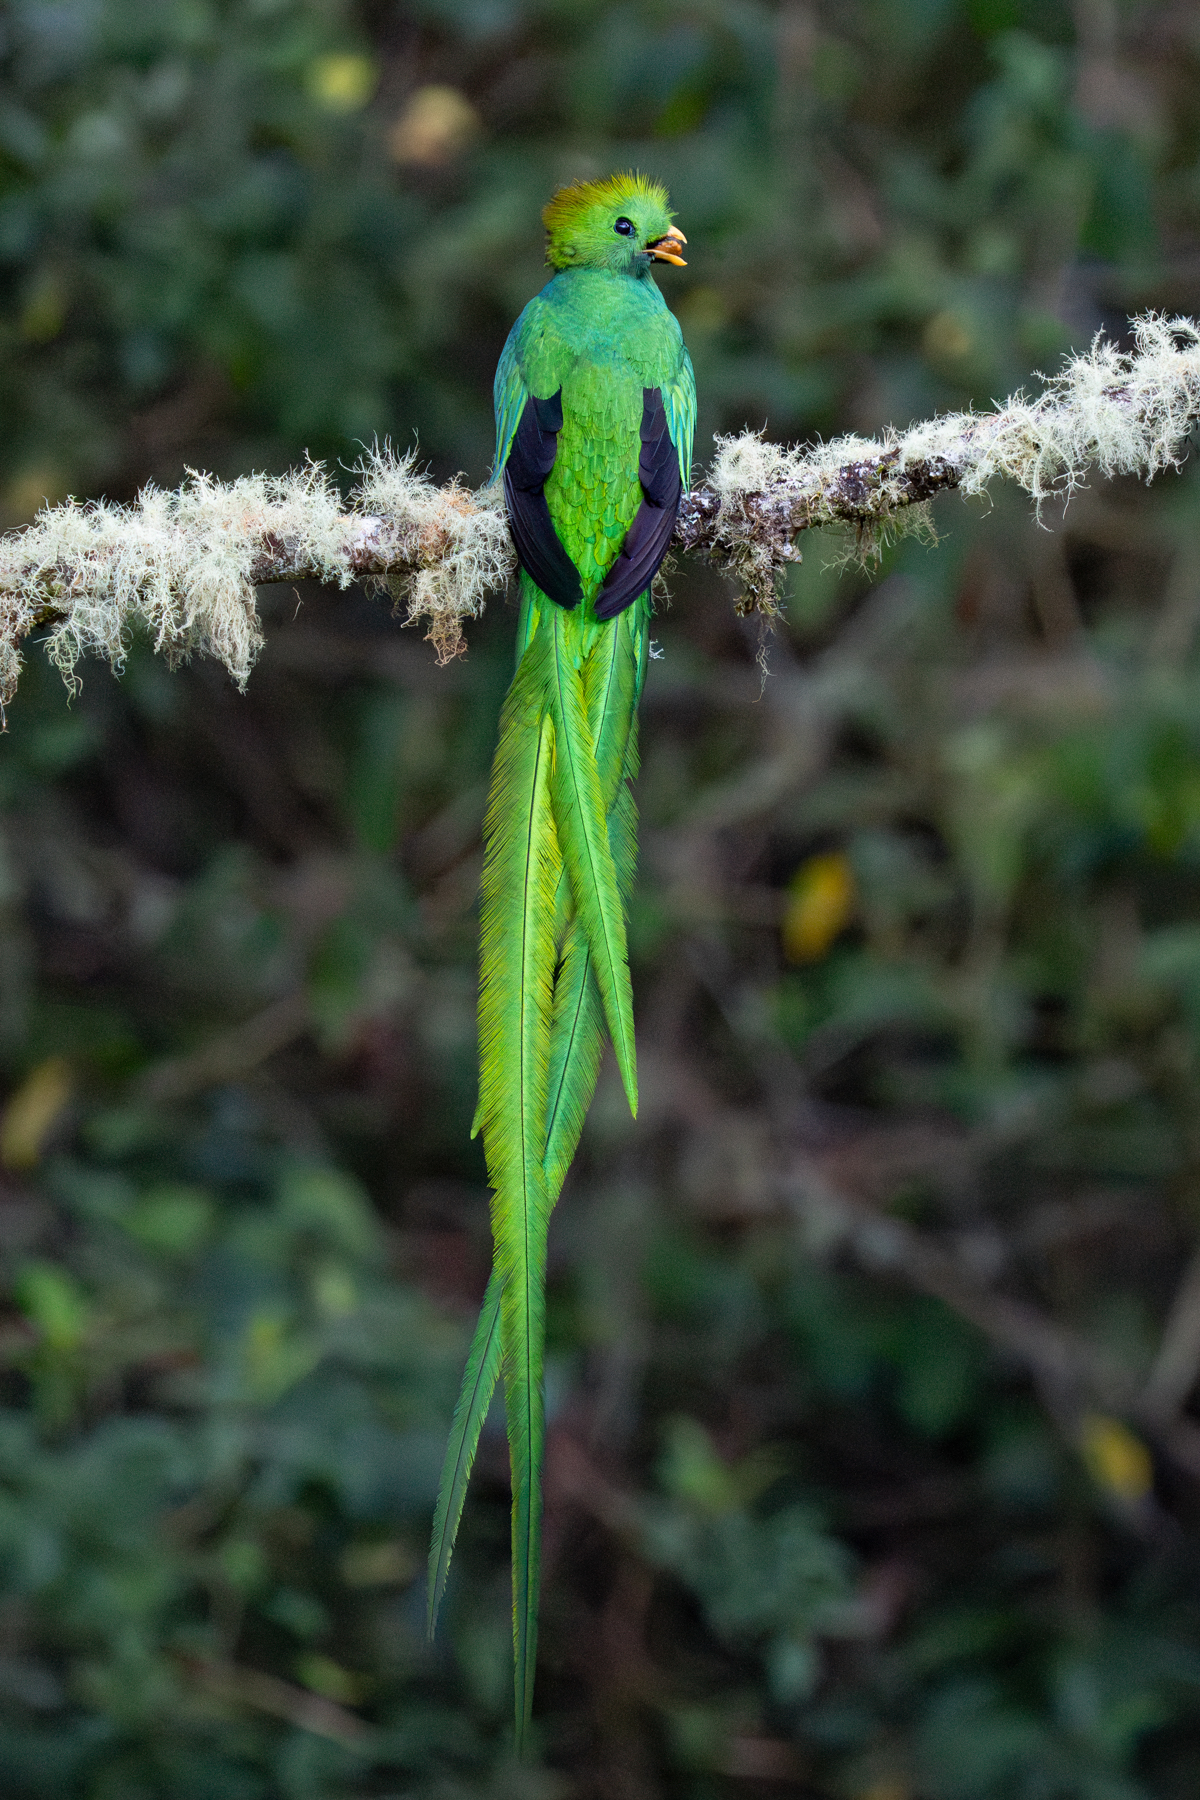 A stunning male Resplendent Quetzal with fruit for his chick (image by Inger Vandyke)